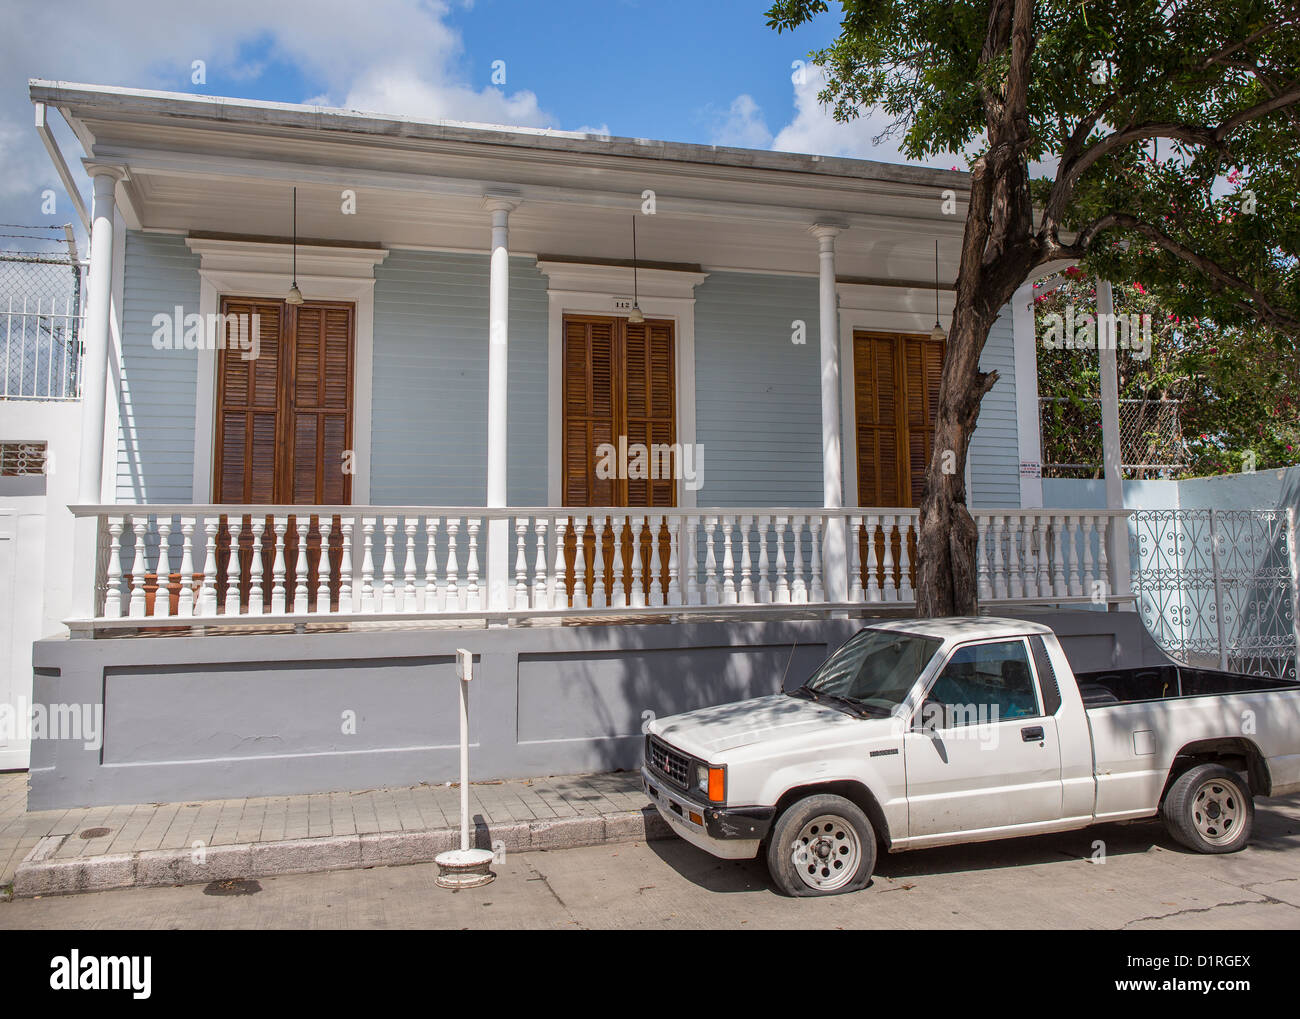 PONCE, PUERTO RICO - Typical wooden home with shutters. Stock Photo